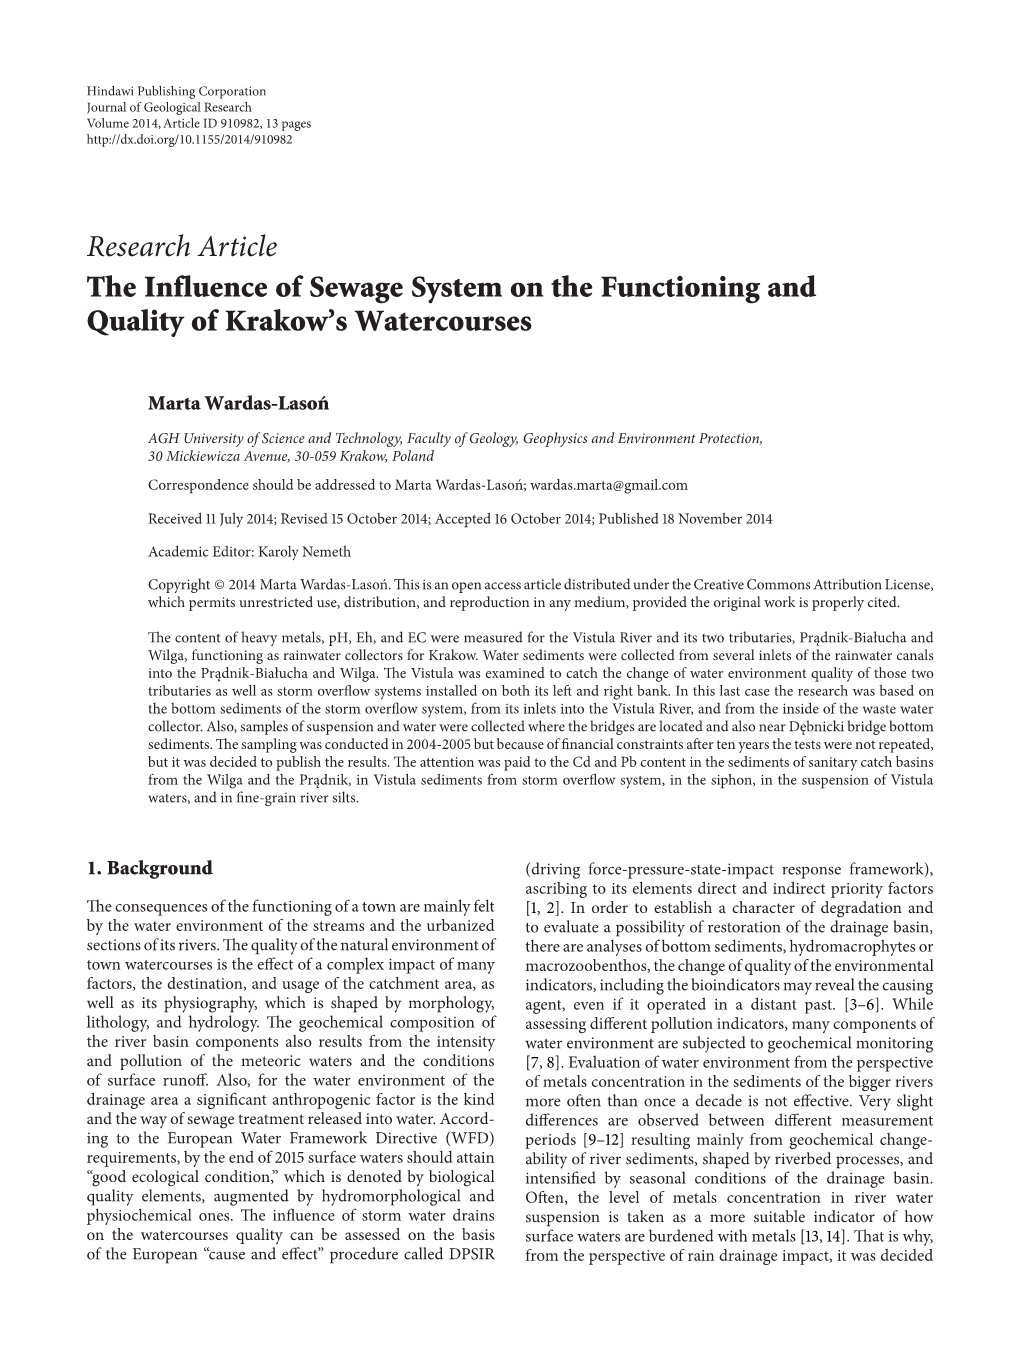 Research Article the Influence of Sewage System on the Functioning and Quality of Krakow’S Watercourses